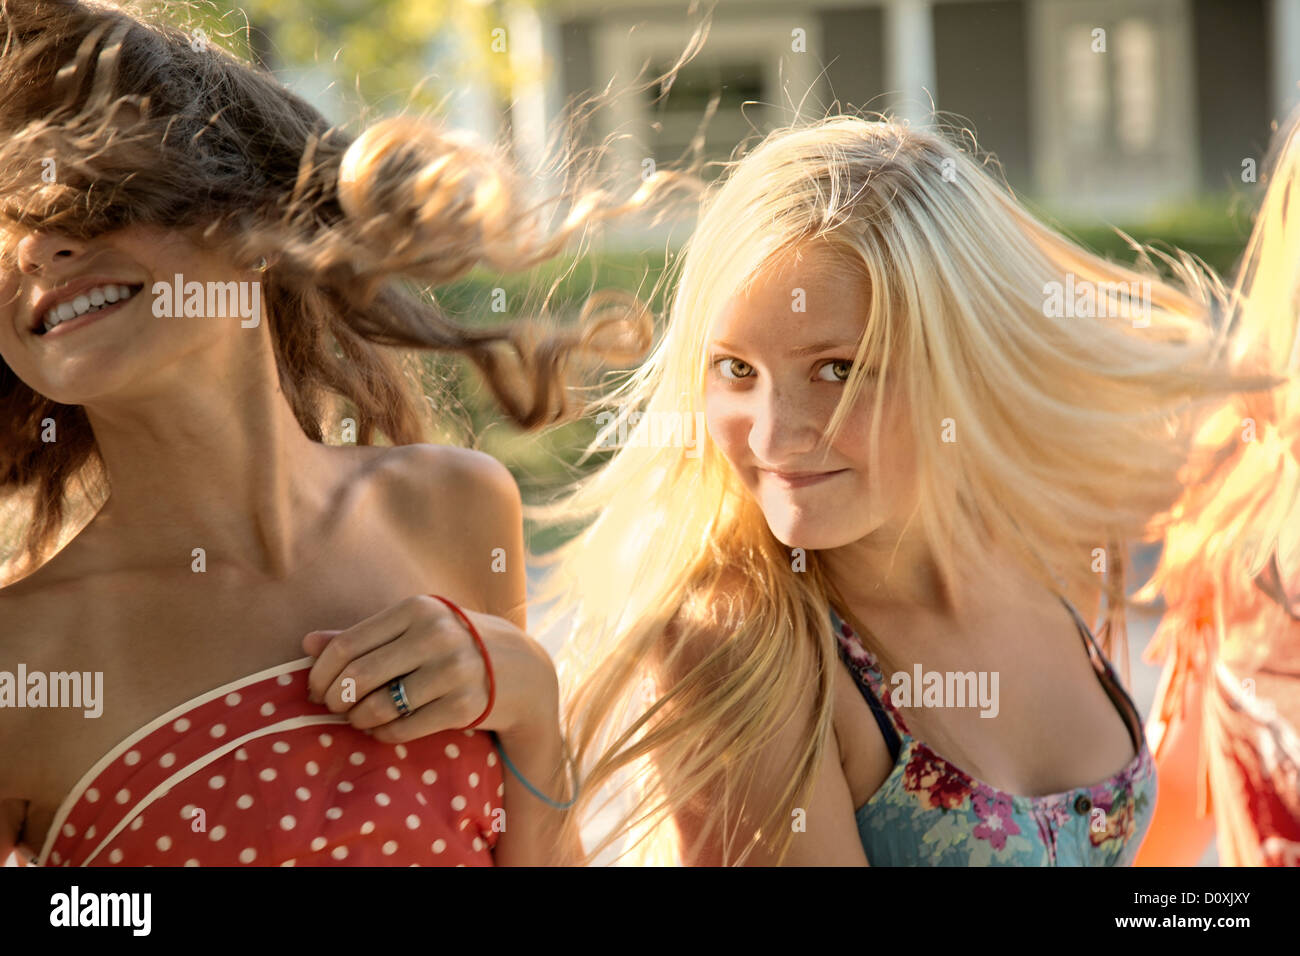 Girls with long hair in sunlight Stock Photo